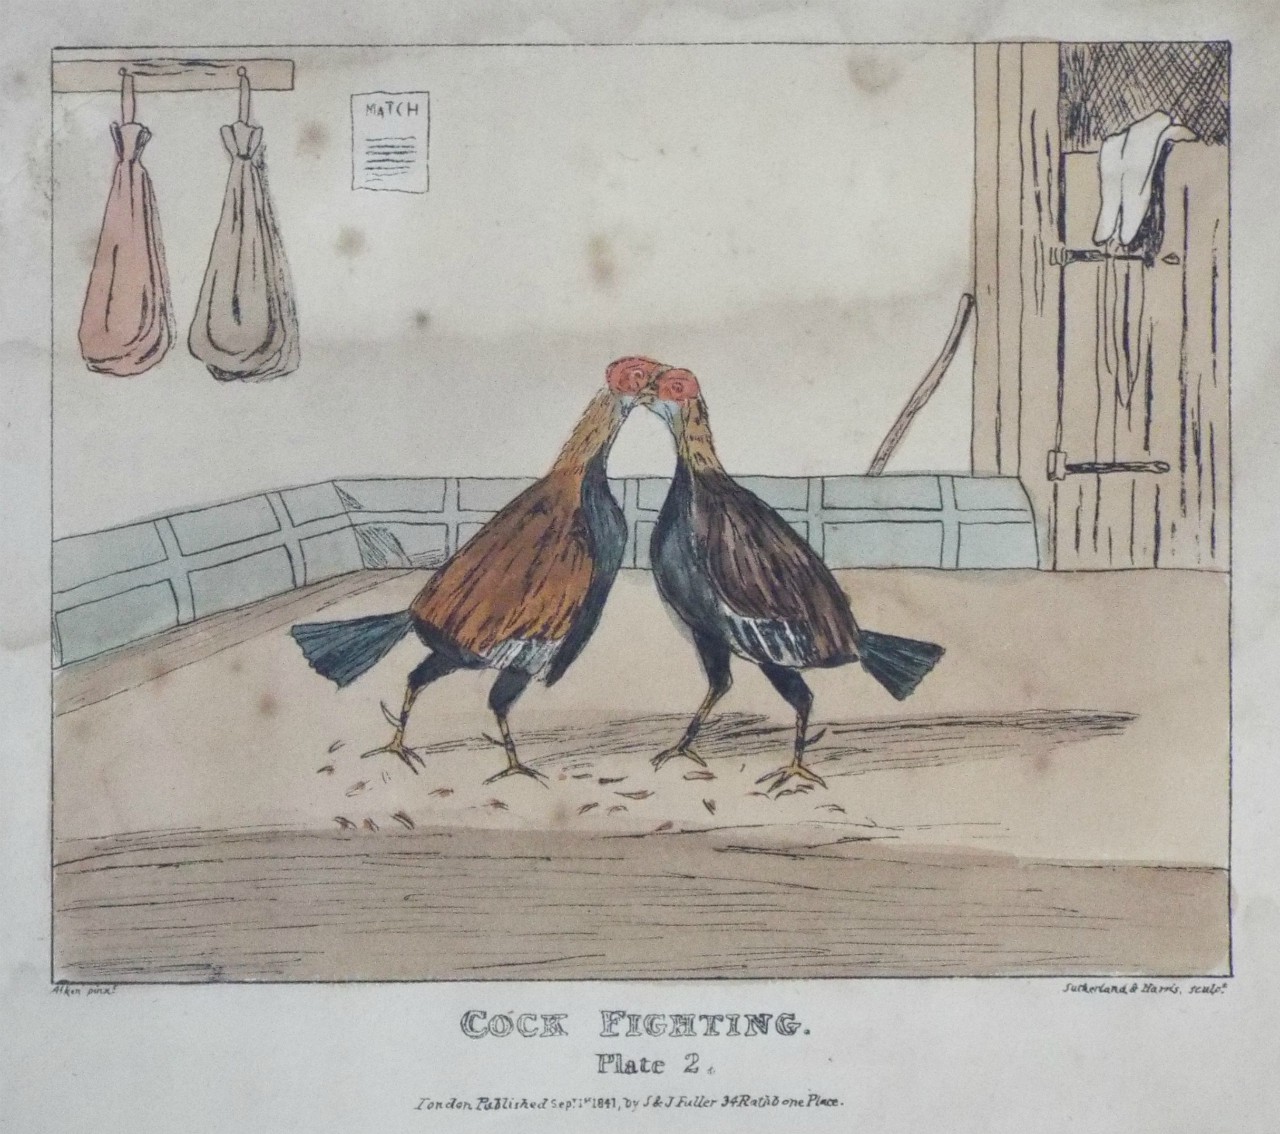 Lithograph - 4 Cock Fighting Plate 2. - Sutherland